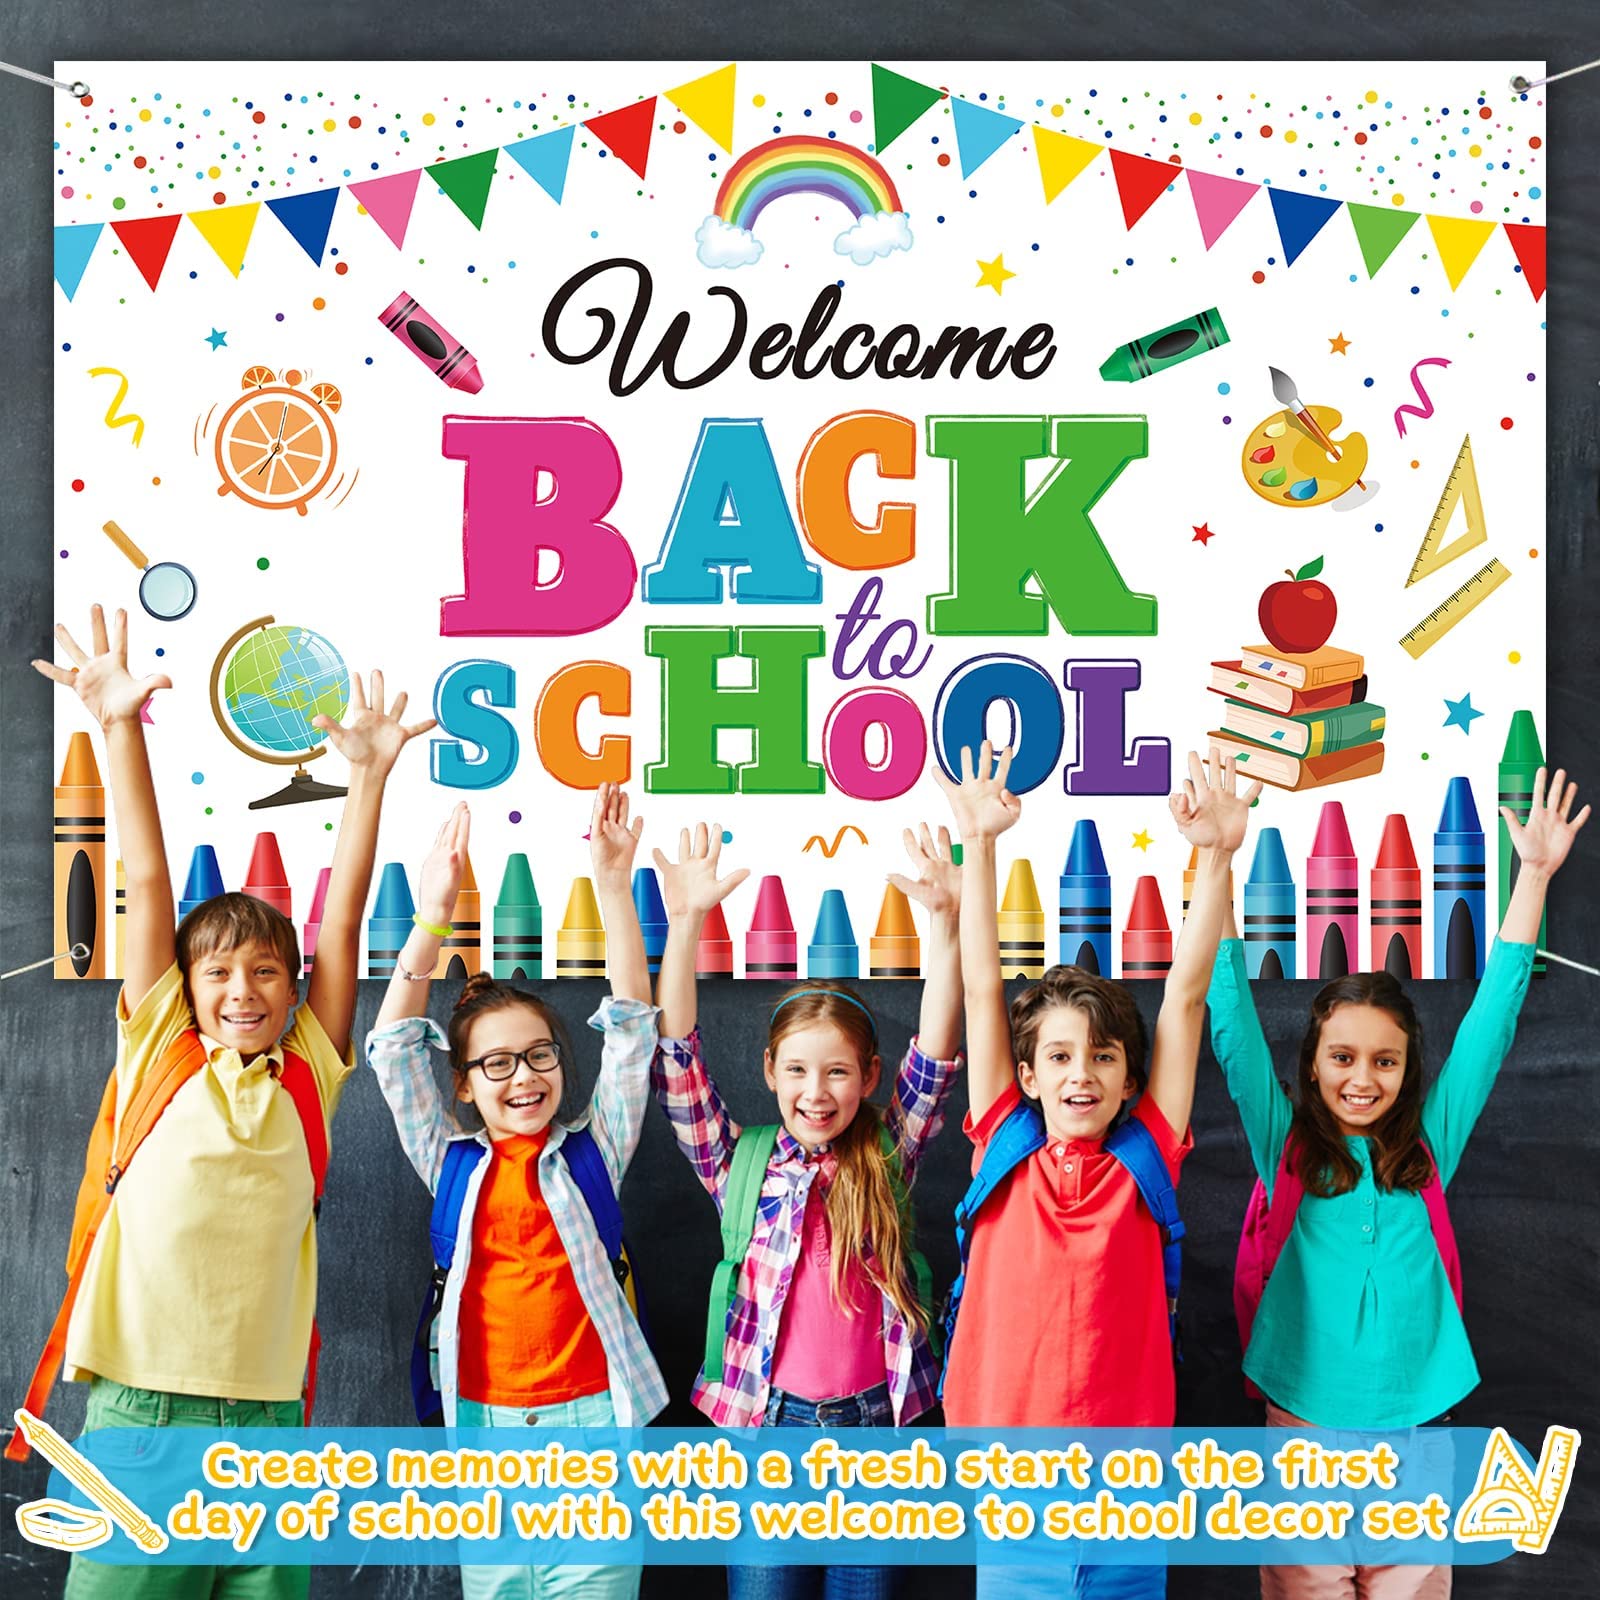 Welcome Back to School Banner, Happiwiz First Day of School Backdrop Banner  Large Fabric Welcome Banner Poster Bulletin Board Flag Photo Booth Prop  Wall Decoration for School Supplies, 73 x 44 Inch